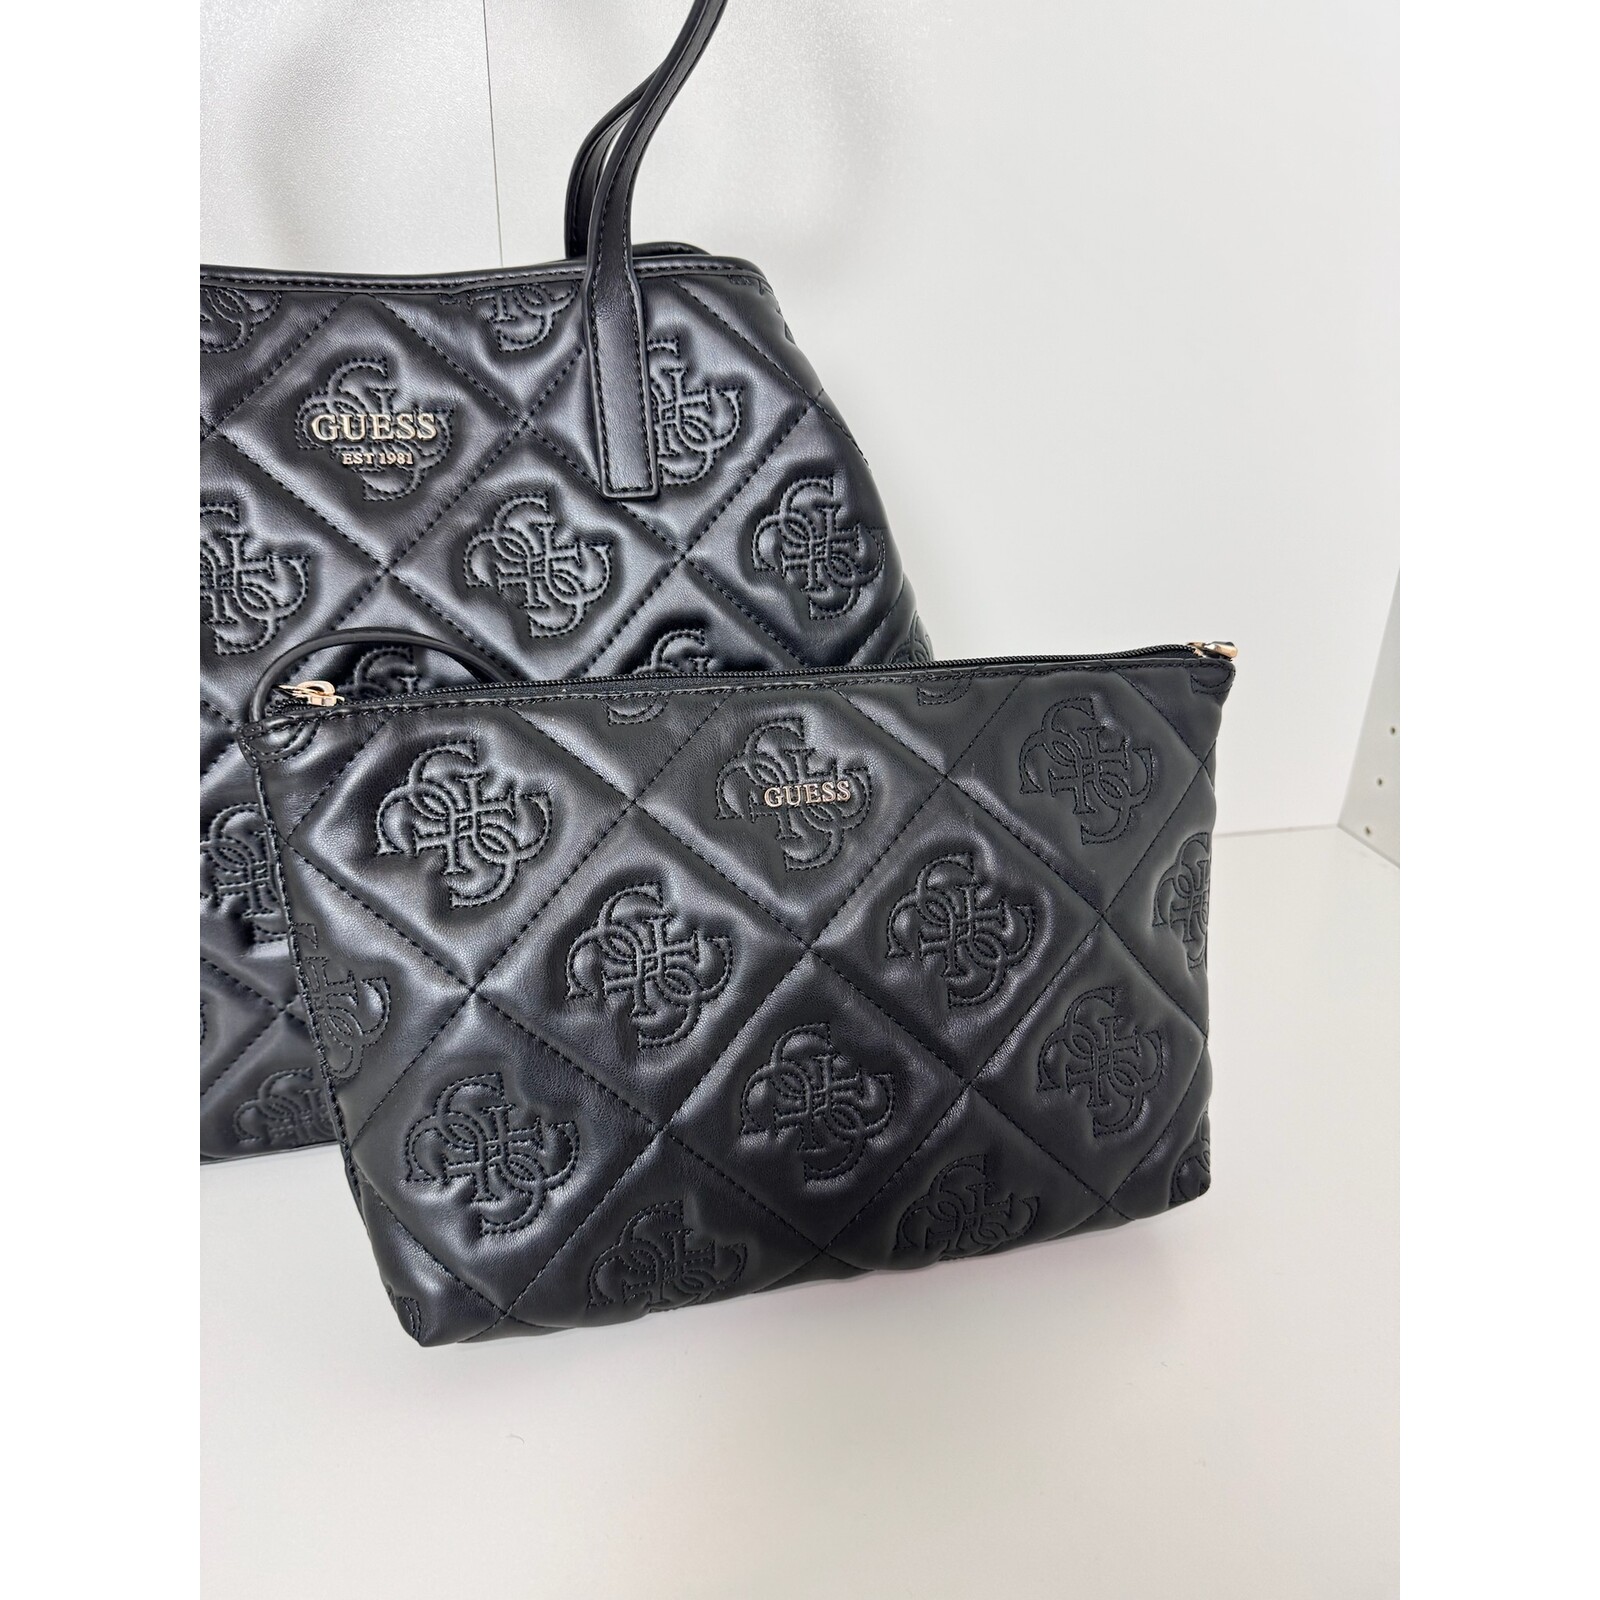 Guess 2 in 1 Bag Vikky Black Guess 824